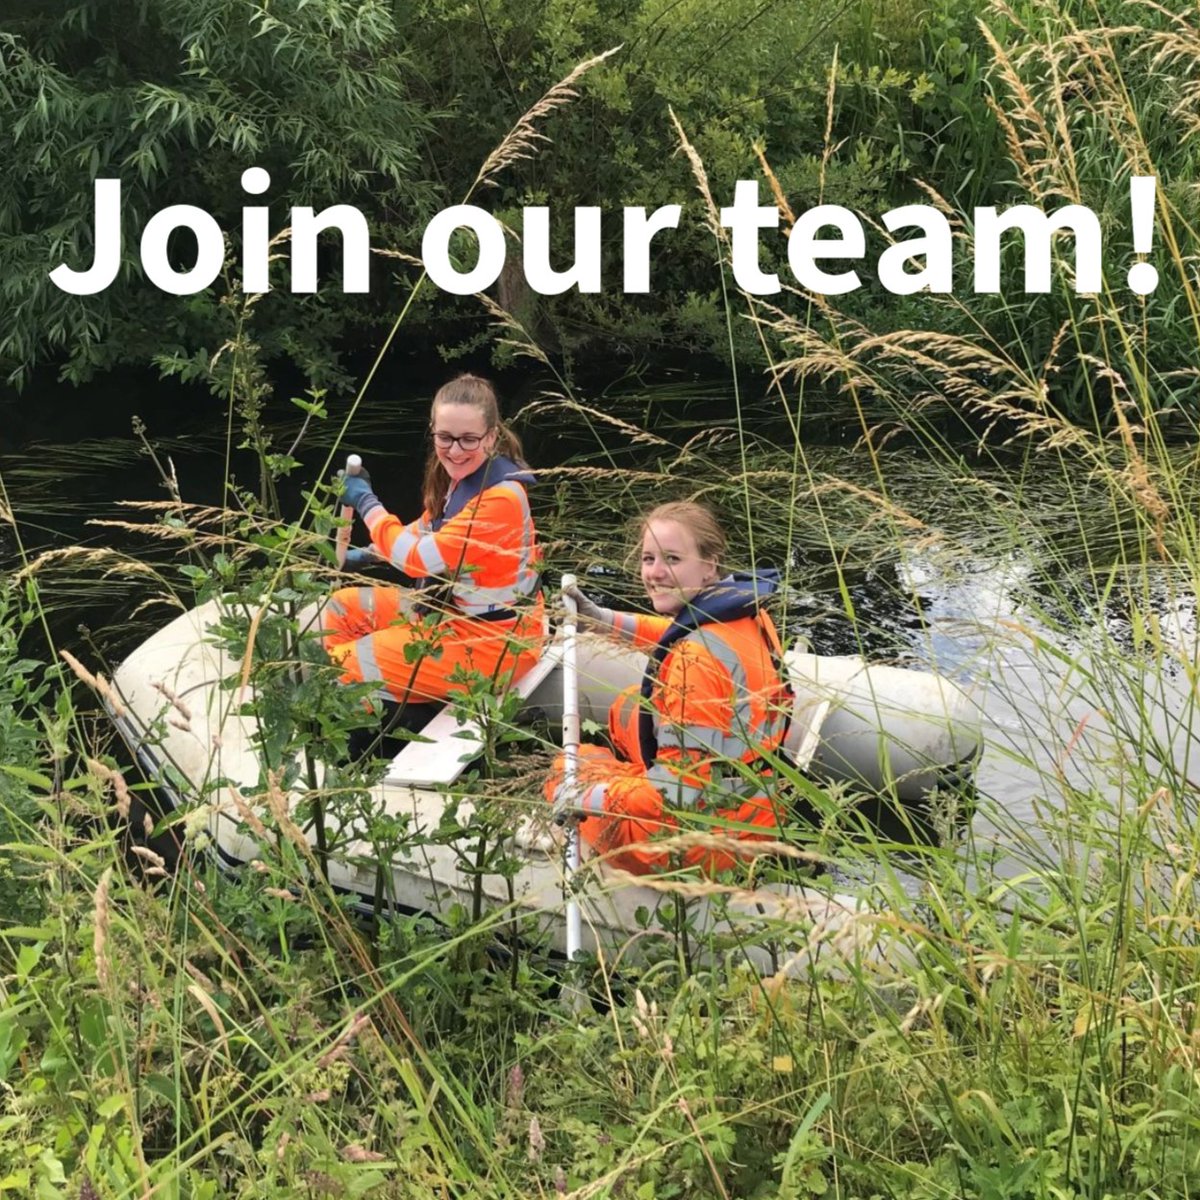 JOIN OUR TEAM
We are #recruiting an Environmental Assistant to join the our Environmental Team. Interested? Download a Job Description at wlma.org.uk/career-opportu…
Apply with your CV and a cover letter by Monday 25th March
#jobs #careeropportunities #environmentaljobs